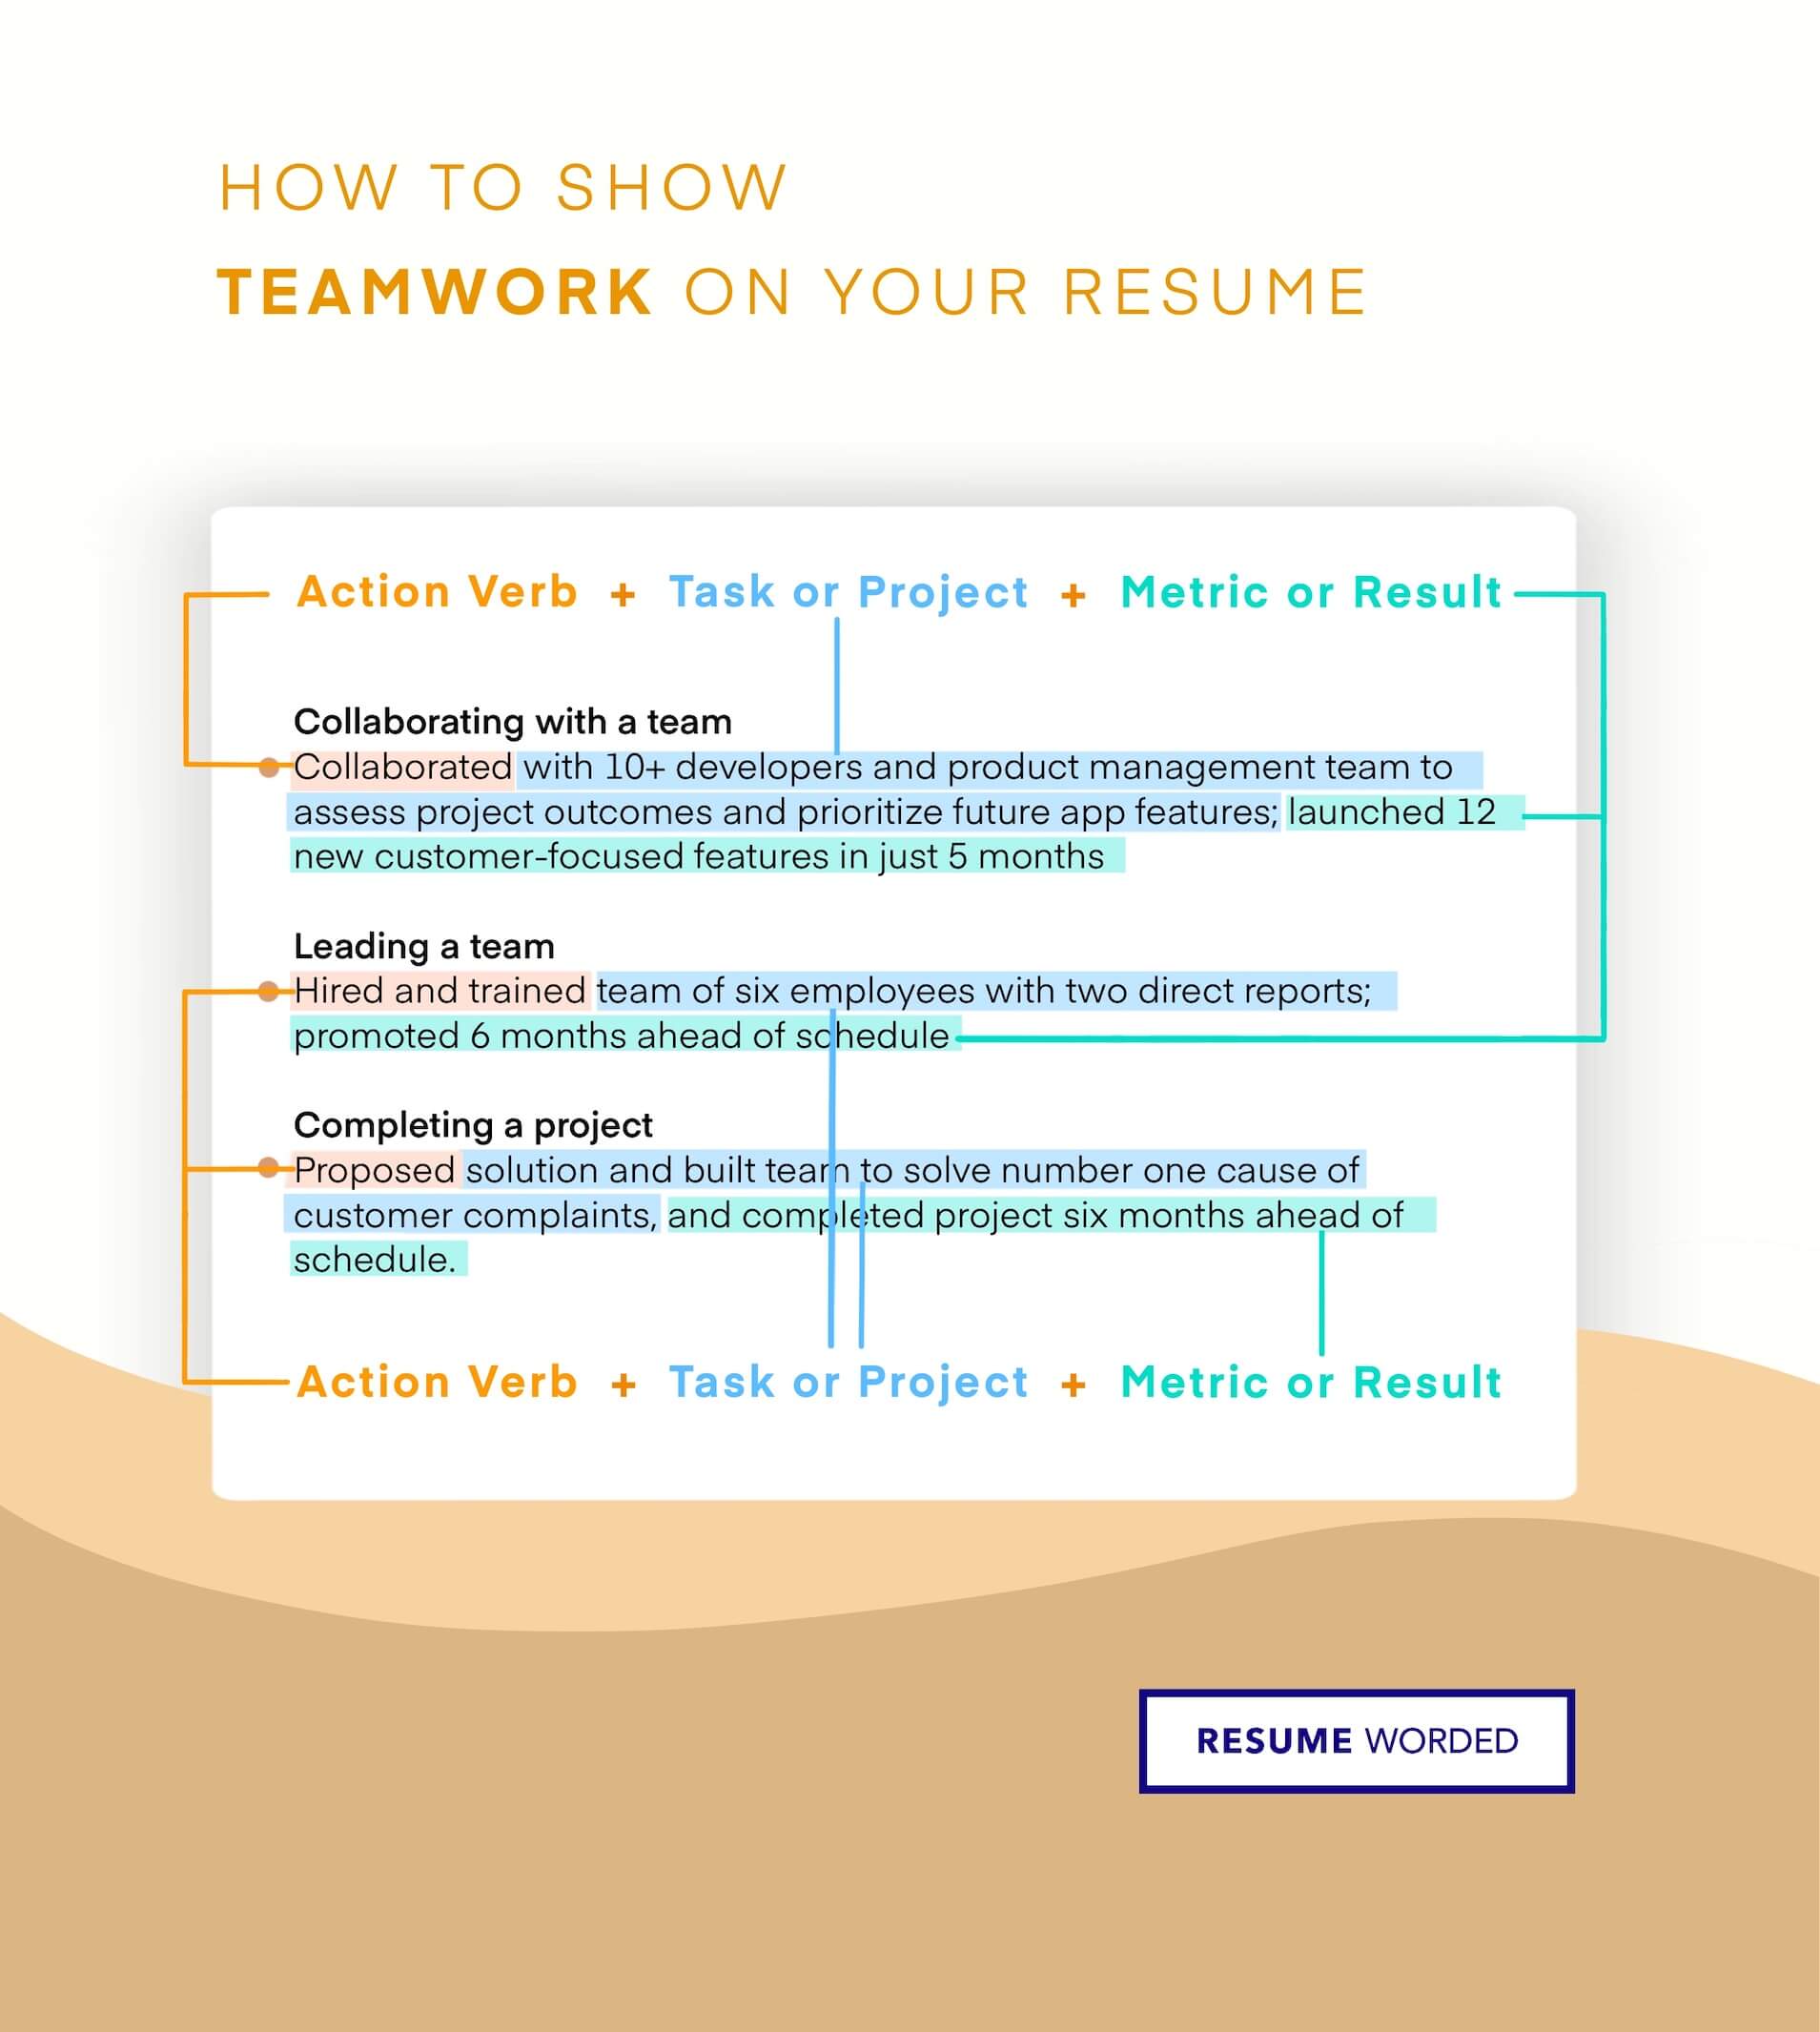 Quantify the size of the teams you have led and their impact on the bottom line. - VP of Sales Resume